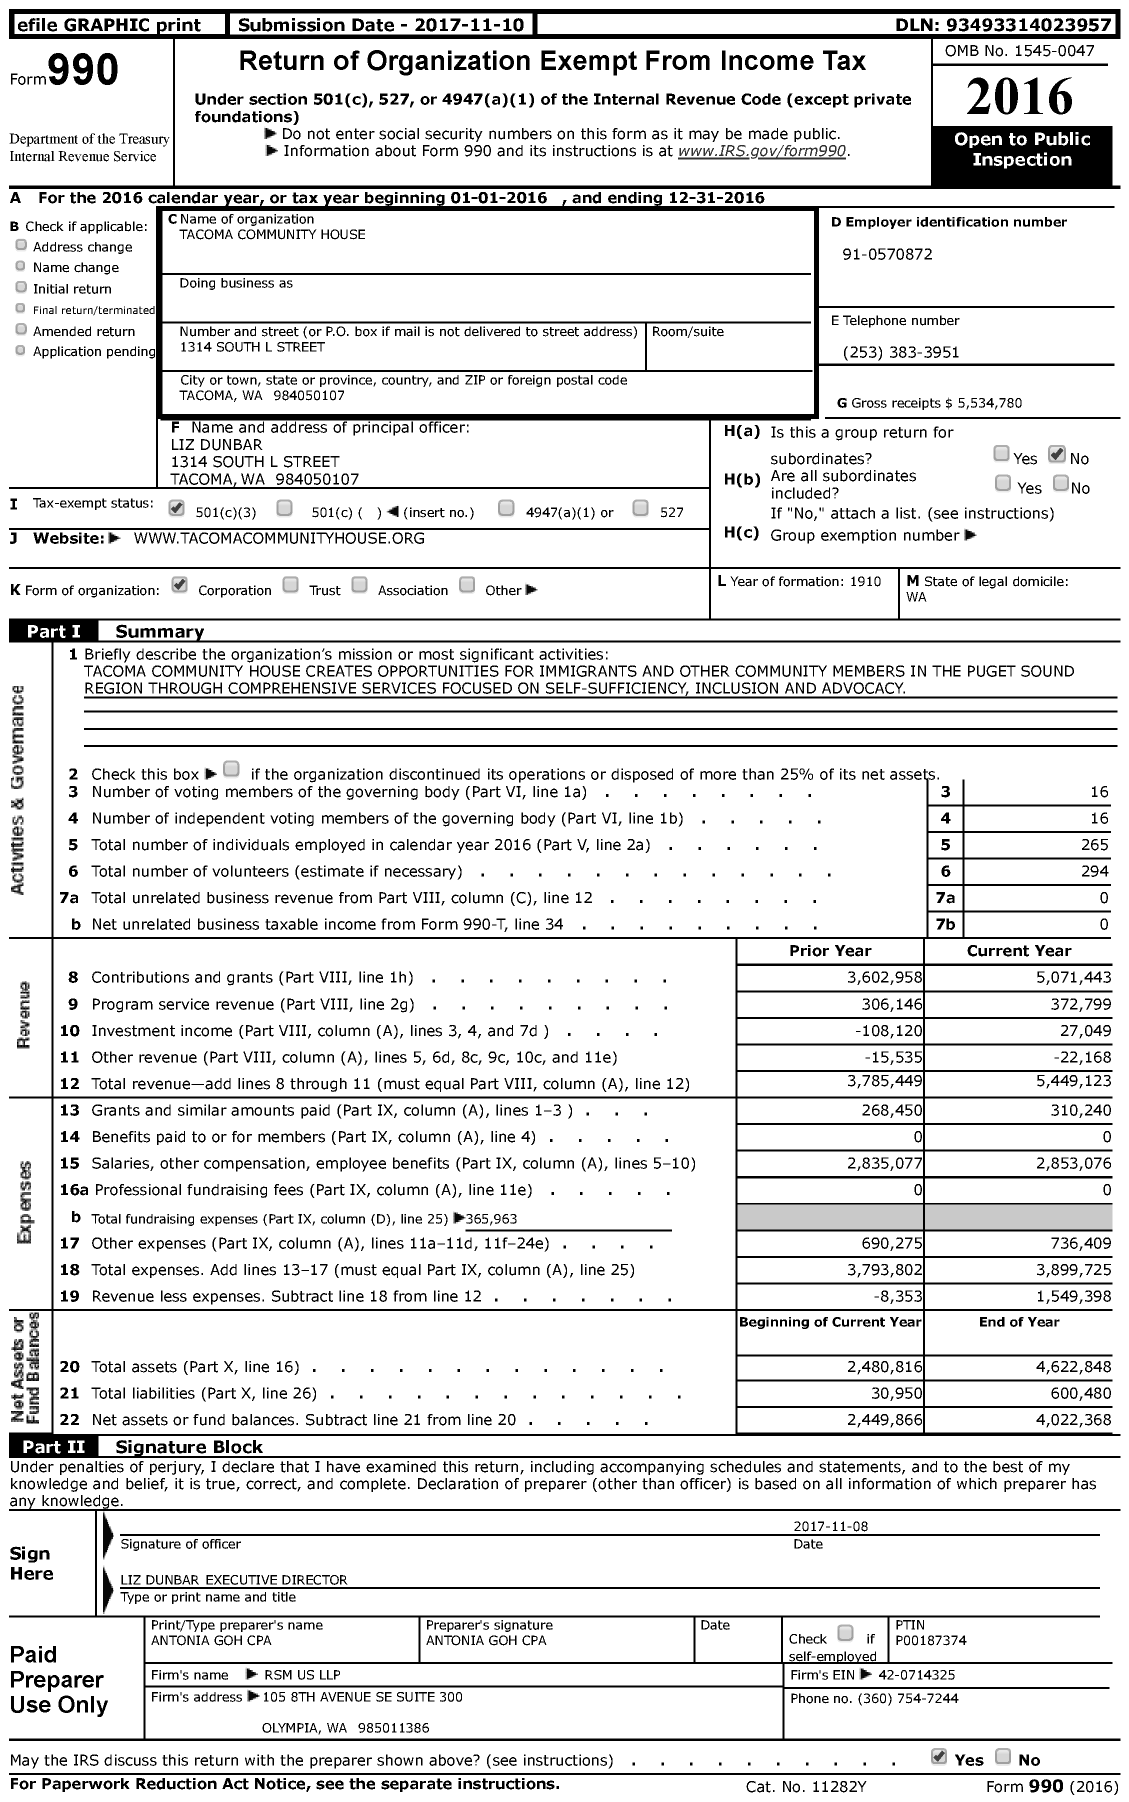 Image of first page of 2016 Form 990 for Tacoma Community House (TCH)